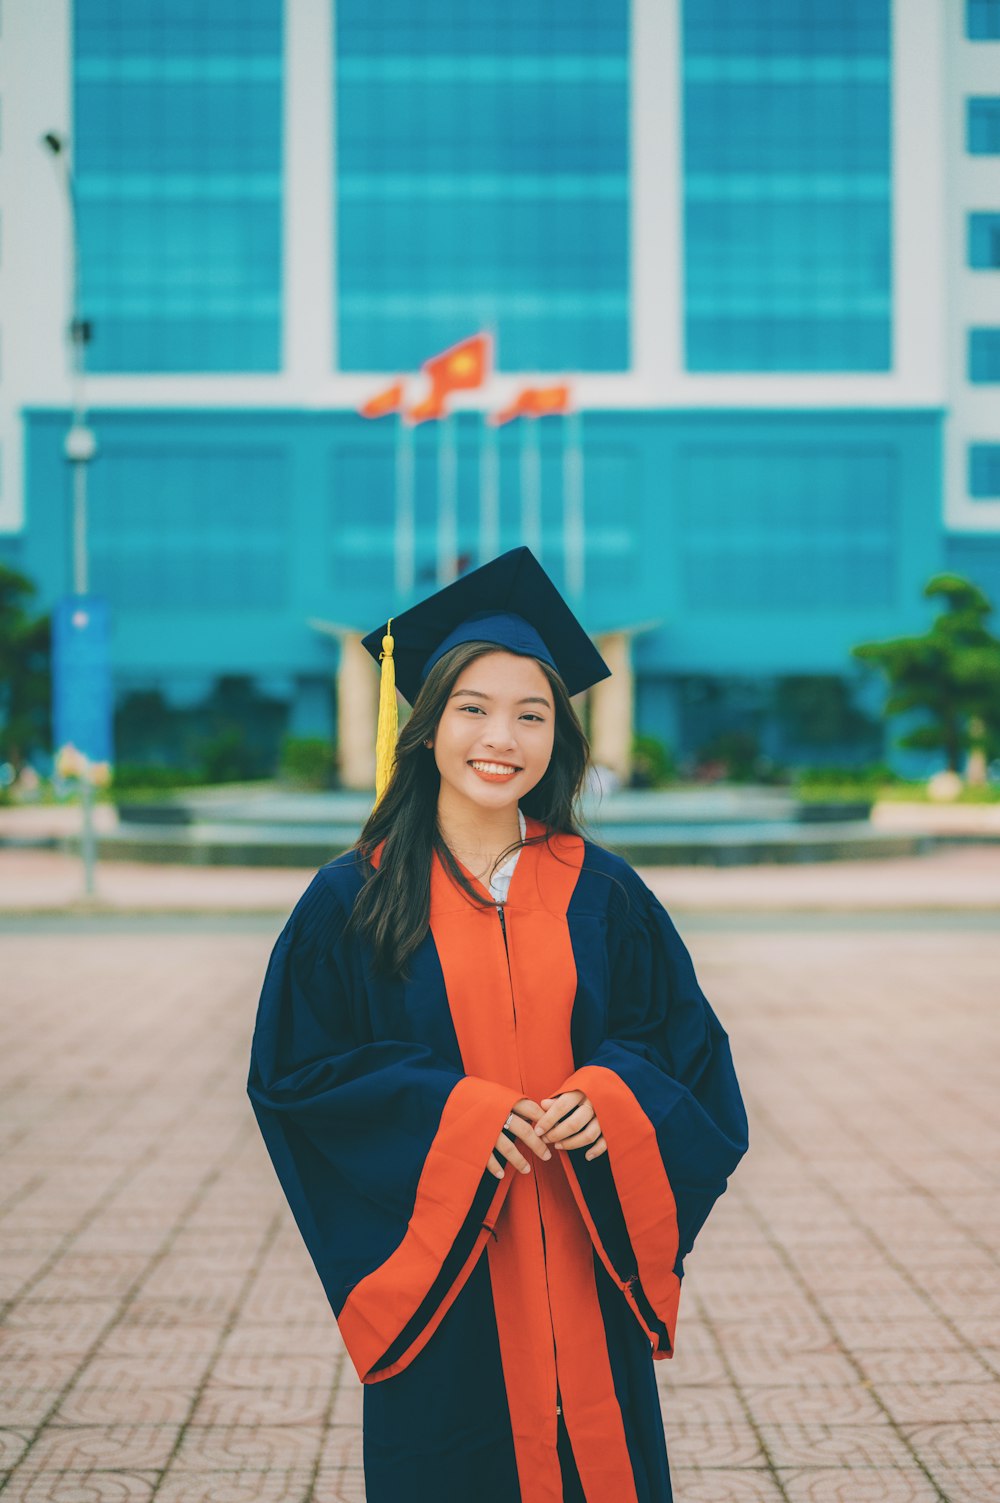 a woman in a graduation gown standing in front of a building